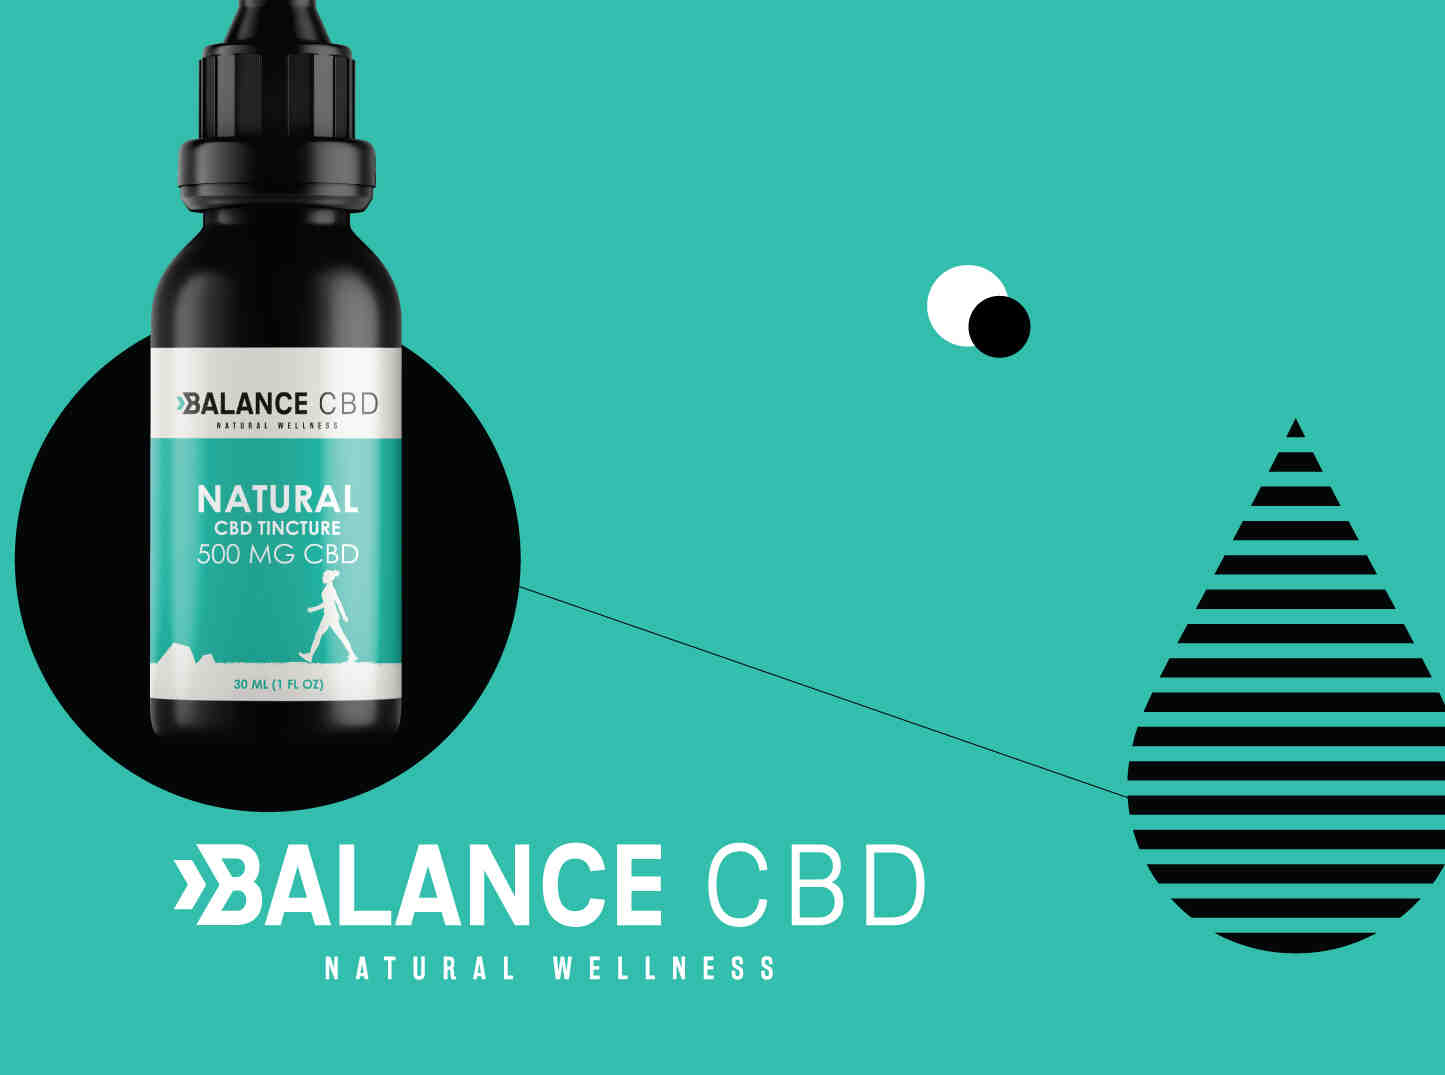 Which is the best CBD Oil in South Africa?